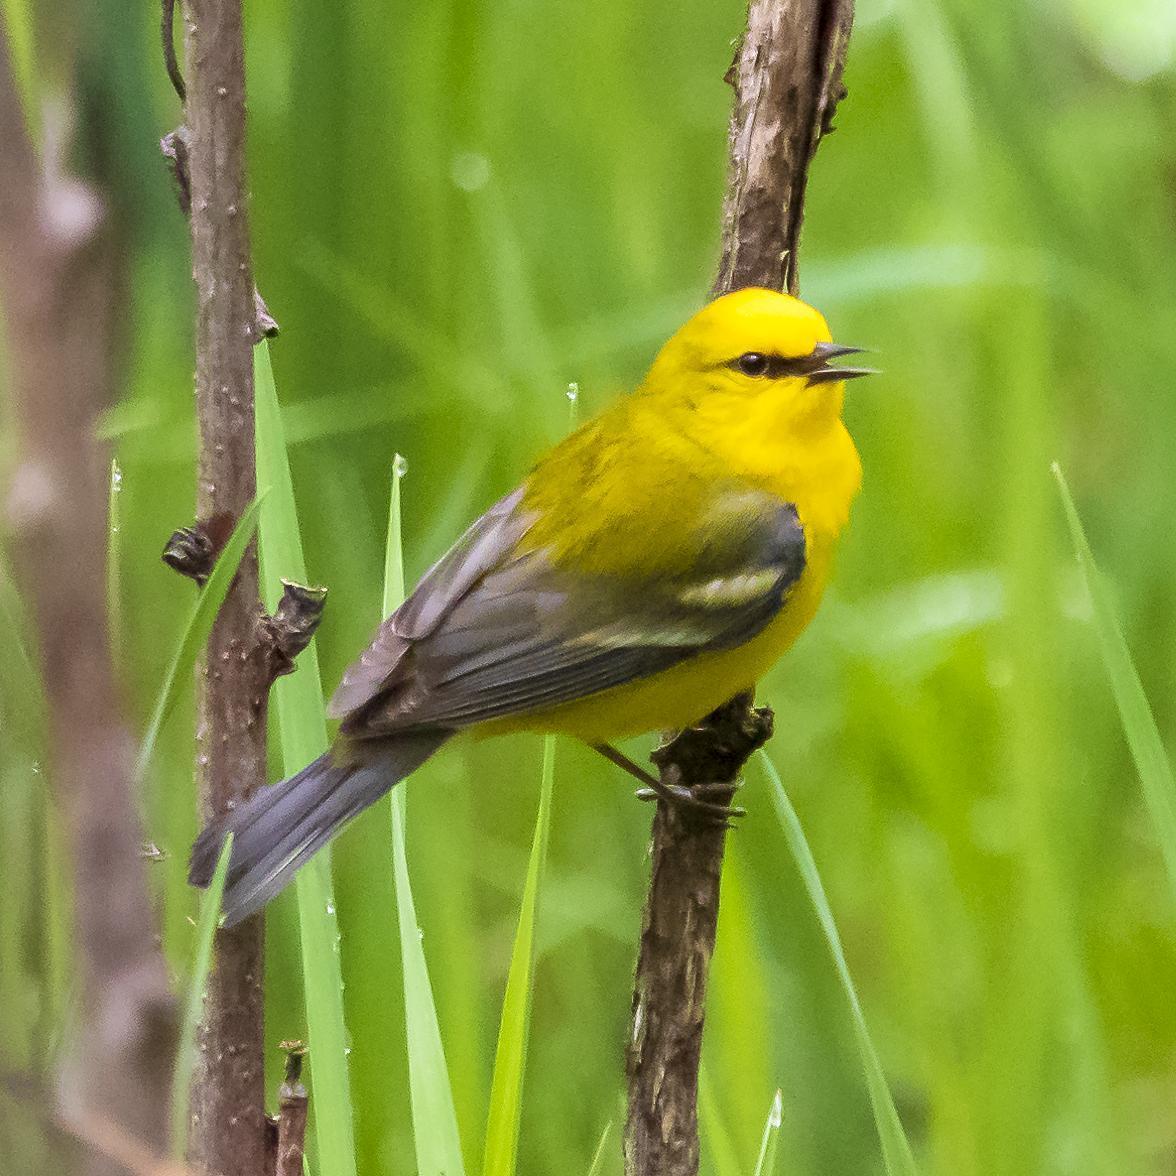 Blue-winged Warbler Photo by Tom Gannon